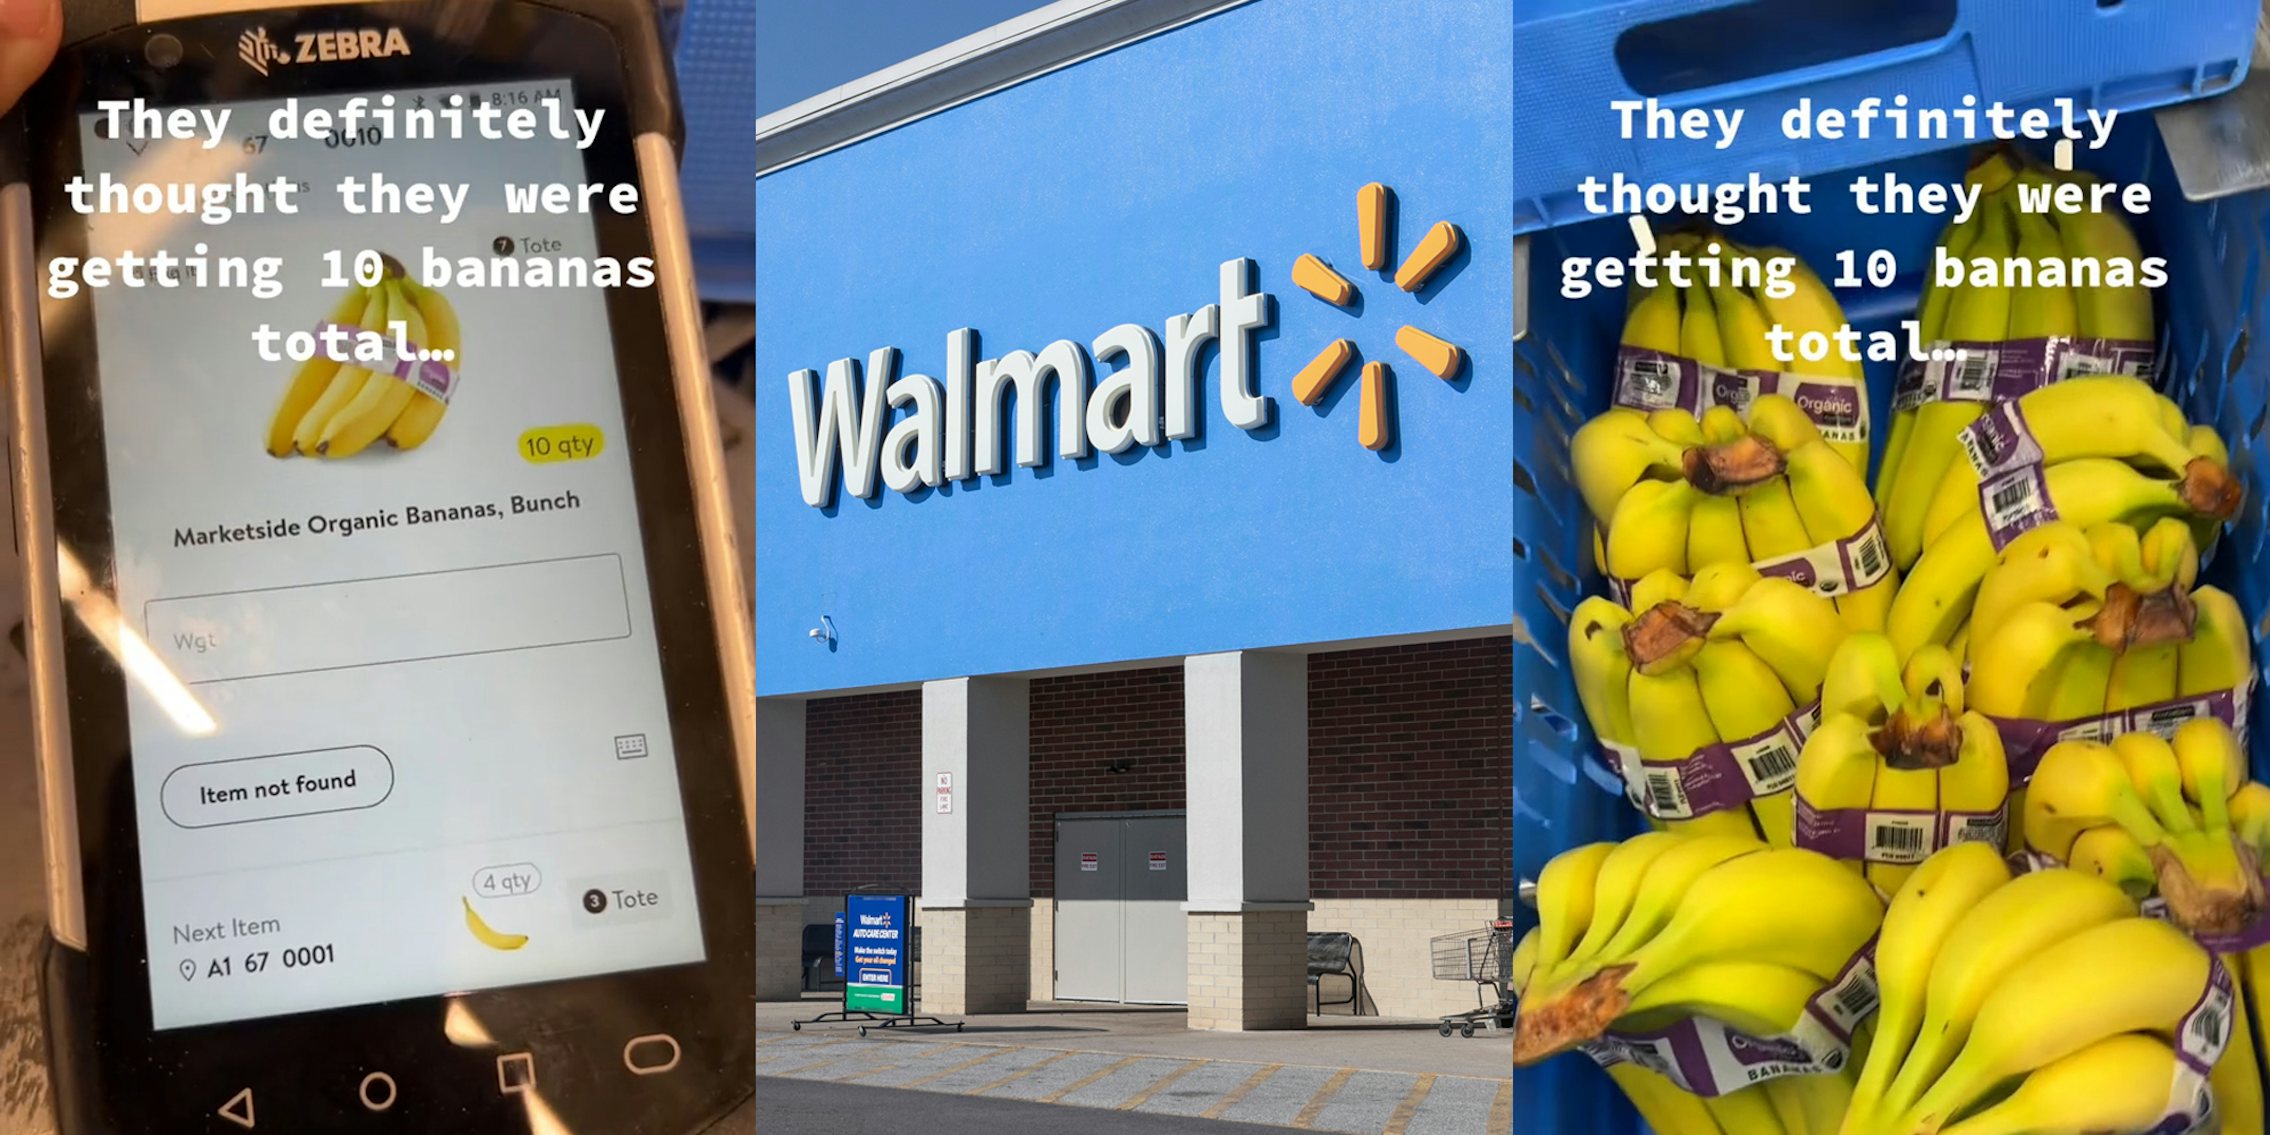 Walmart worker's zebra scanner with 10 bundles of bananas order on screen with caption 'They definitely thought they were getting 10 bananas total...' (l) Walmart building with sign (c) 10 bundles of bananas in blue crate with caption 'They definitely thought they were getting 10 bananas total...' (r)